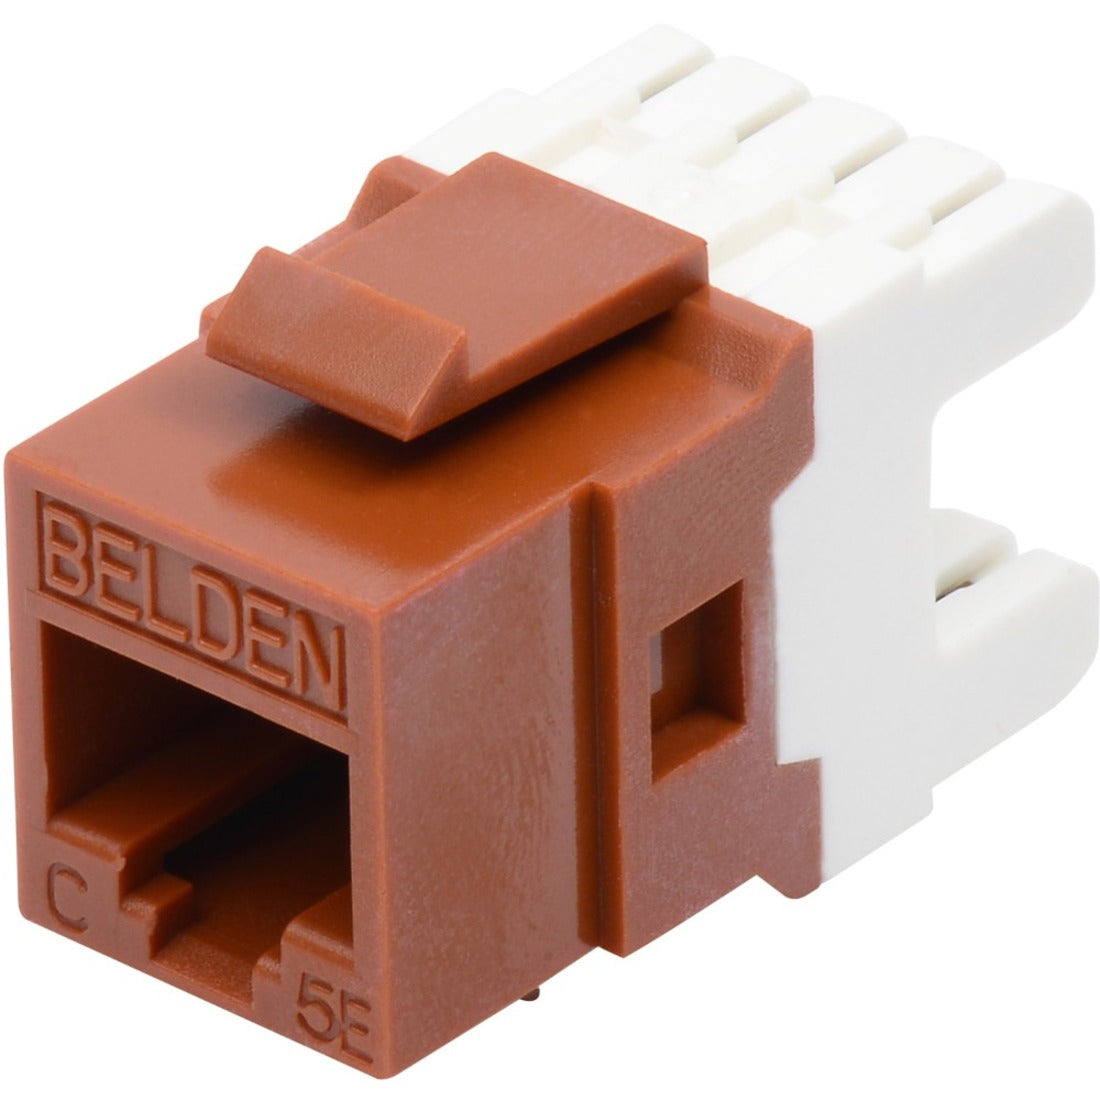 Belden AX101309 CAT5E Modular Jack KeyConnect, Electrical White, RJ45 Network Connector